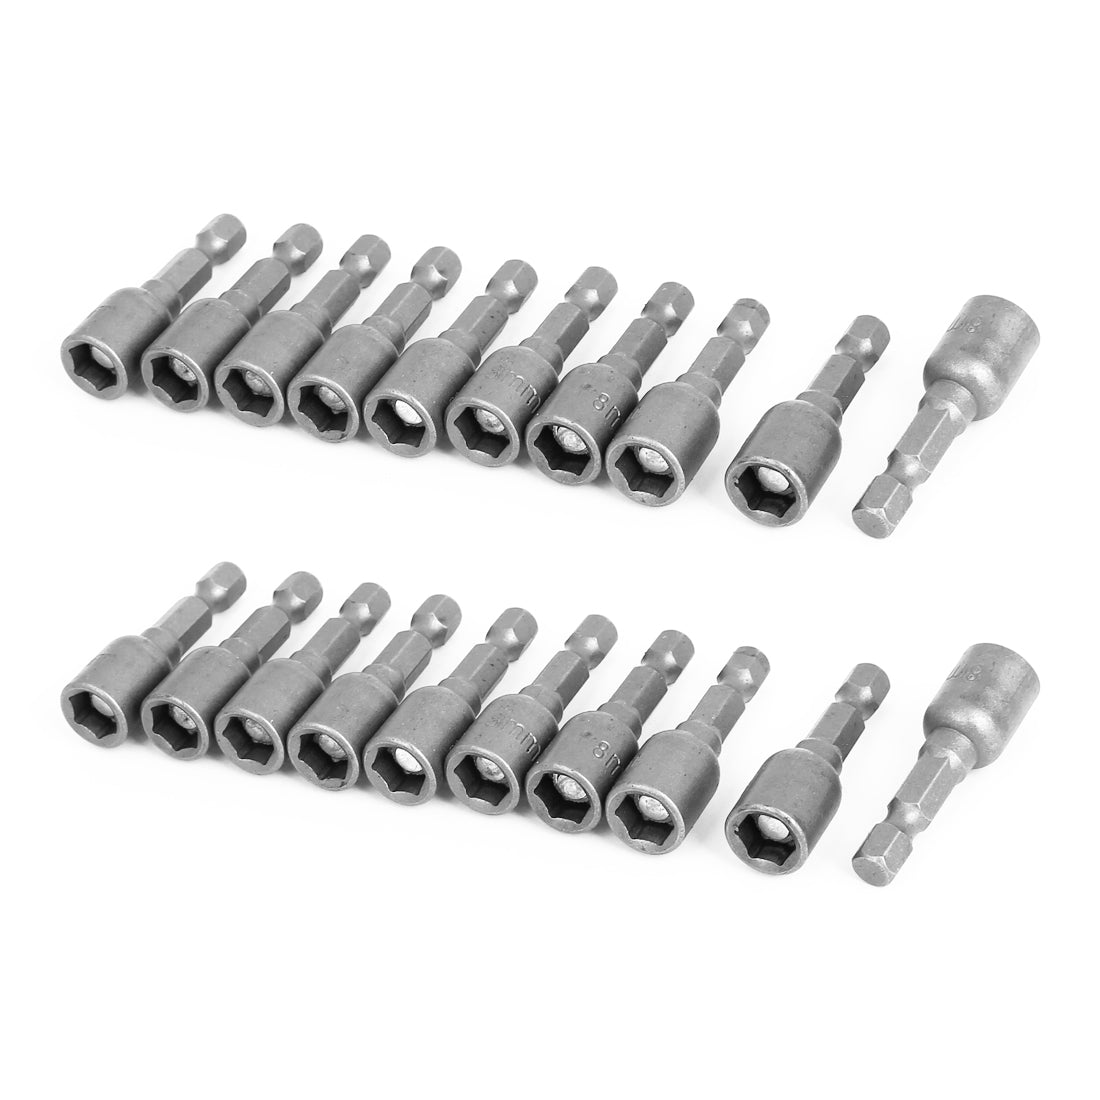 uxcell Uxcell Magnetic Nut Driver Setter 8mm 5/16" Socket Adapter 20pcs